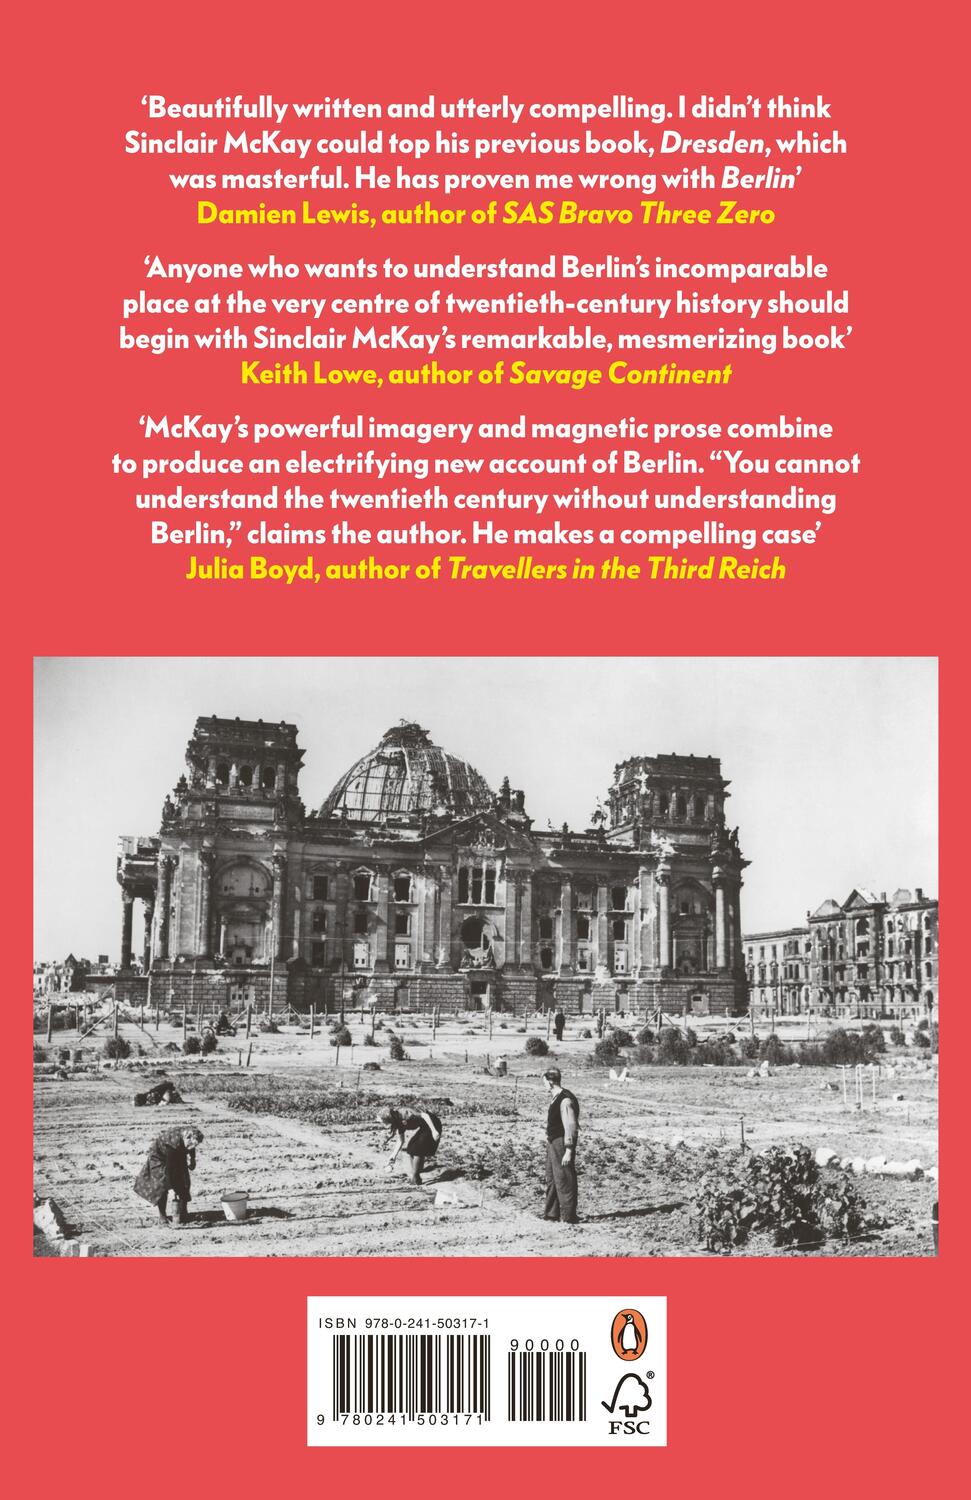 Rückseite: 9780241503171 | Berlin | Life and Loss in the City That Shaped the Century | McKay